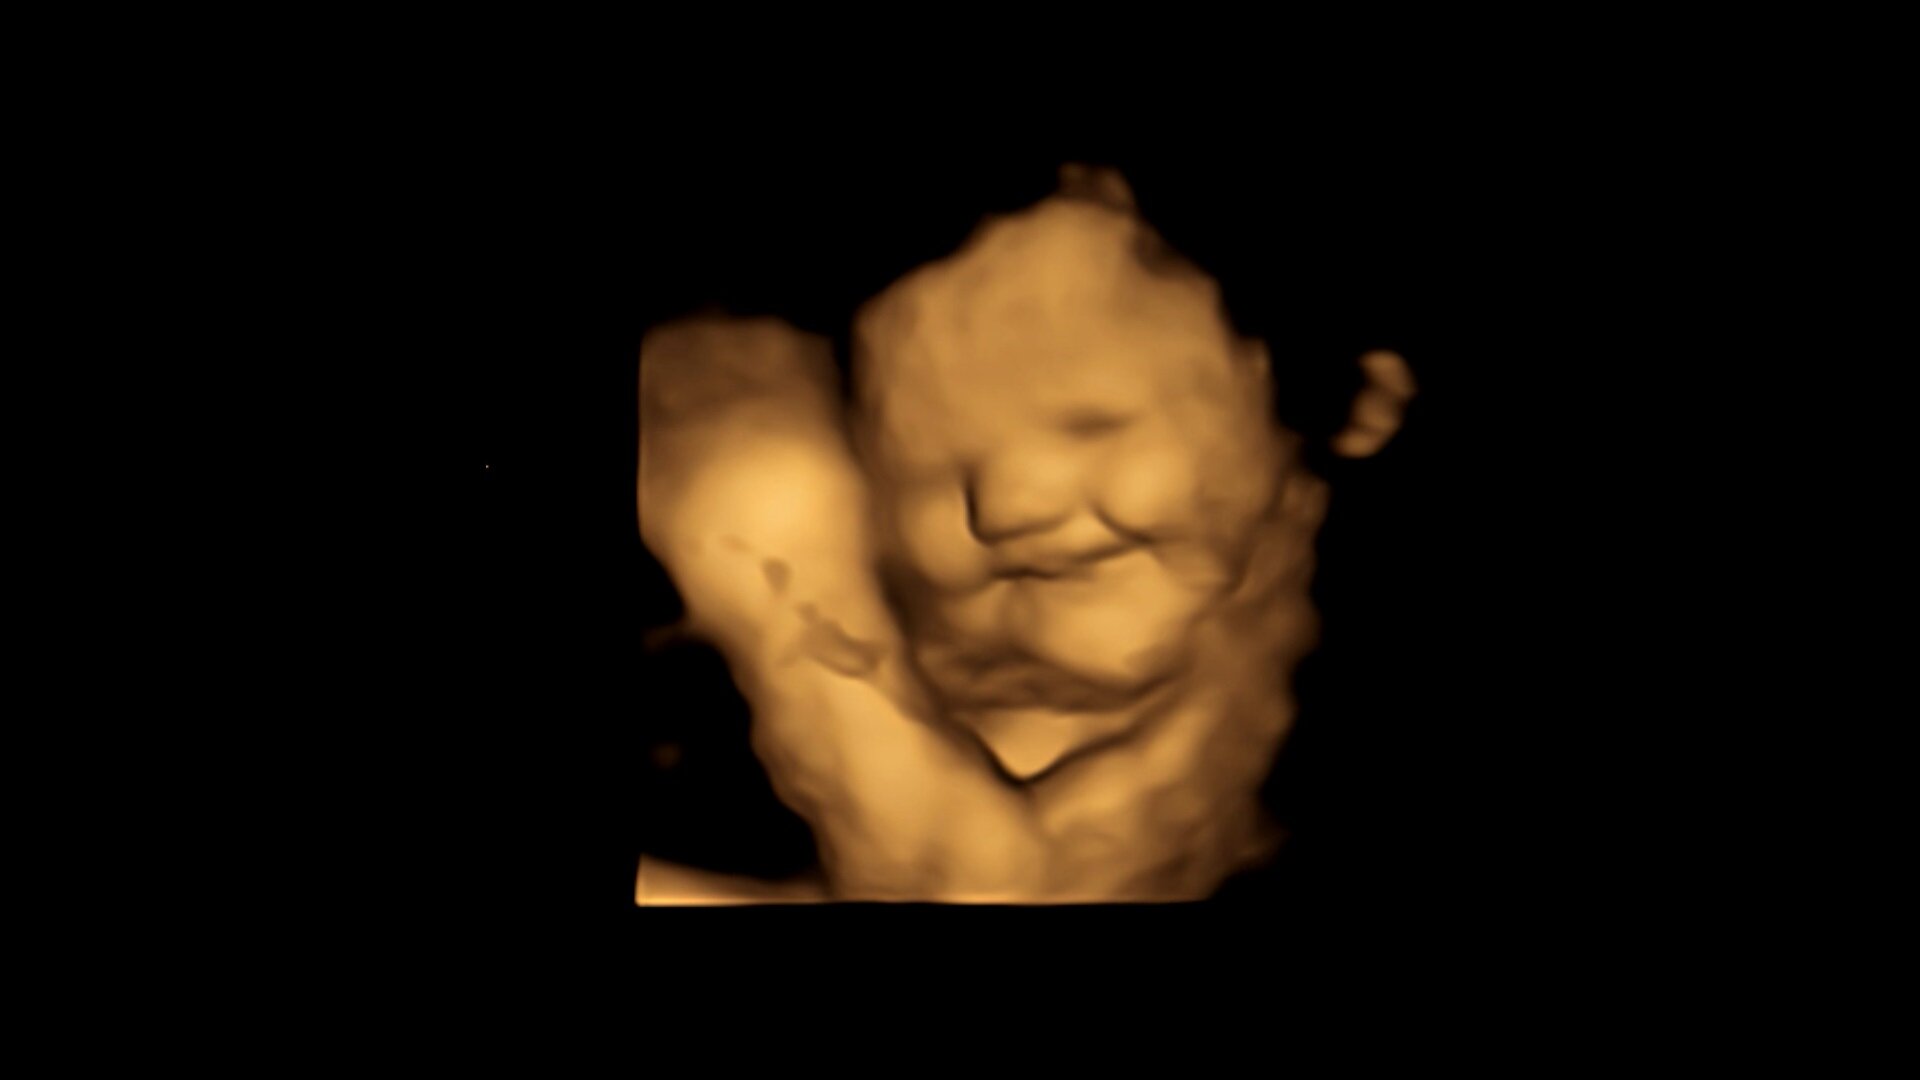 First direct evidence that babies react to taste and smell in the womb